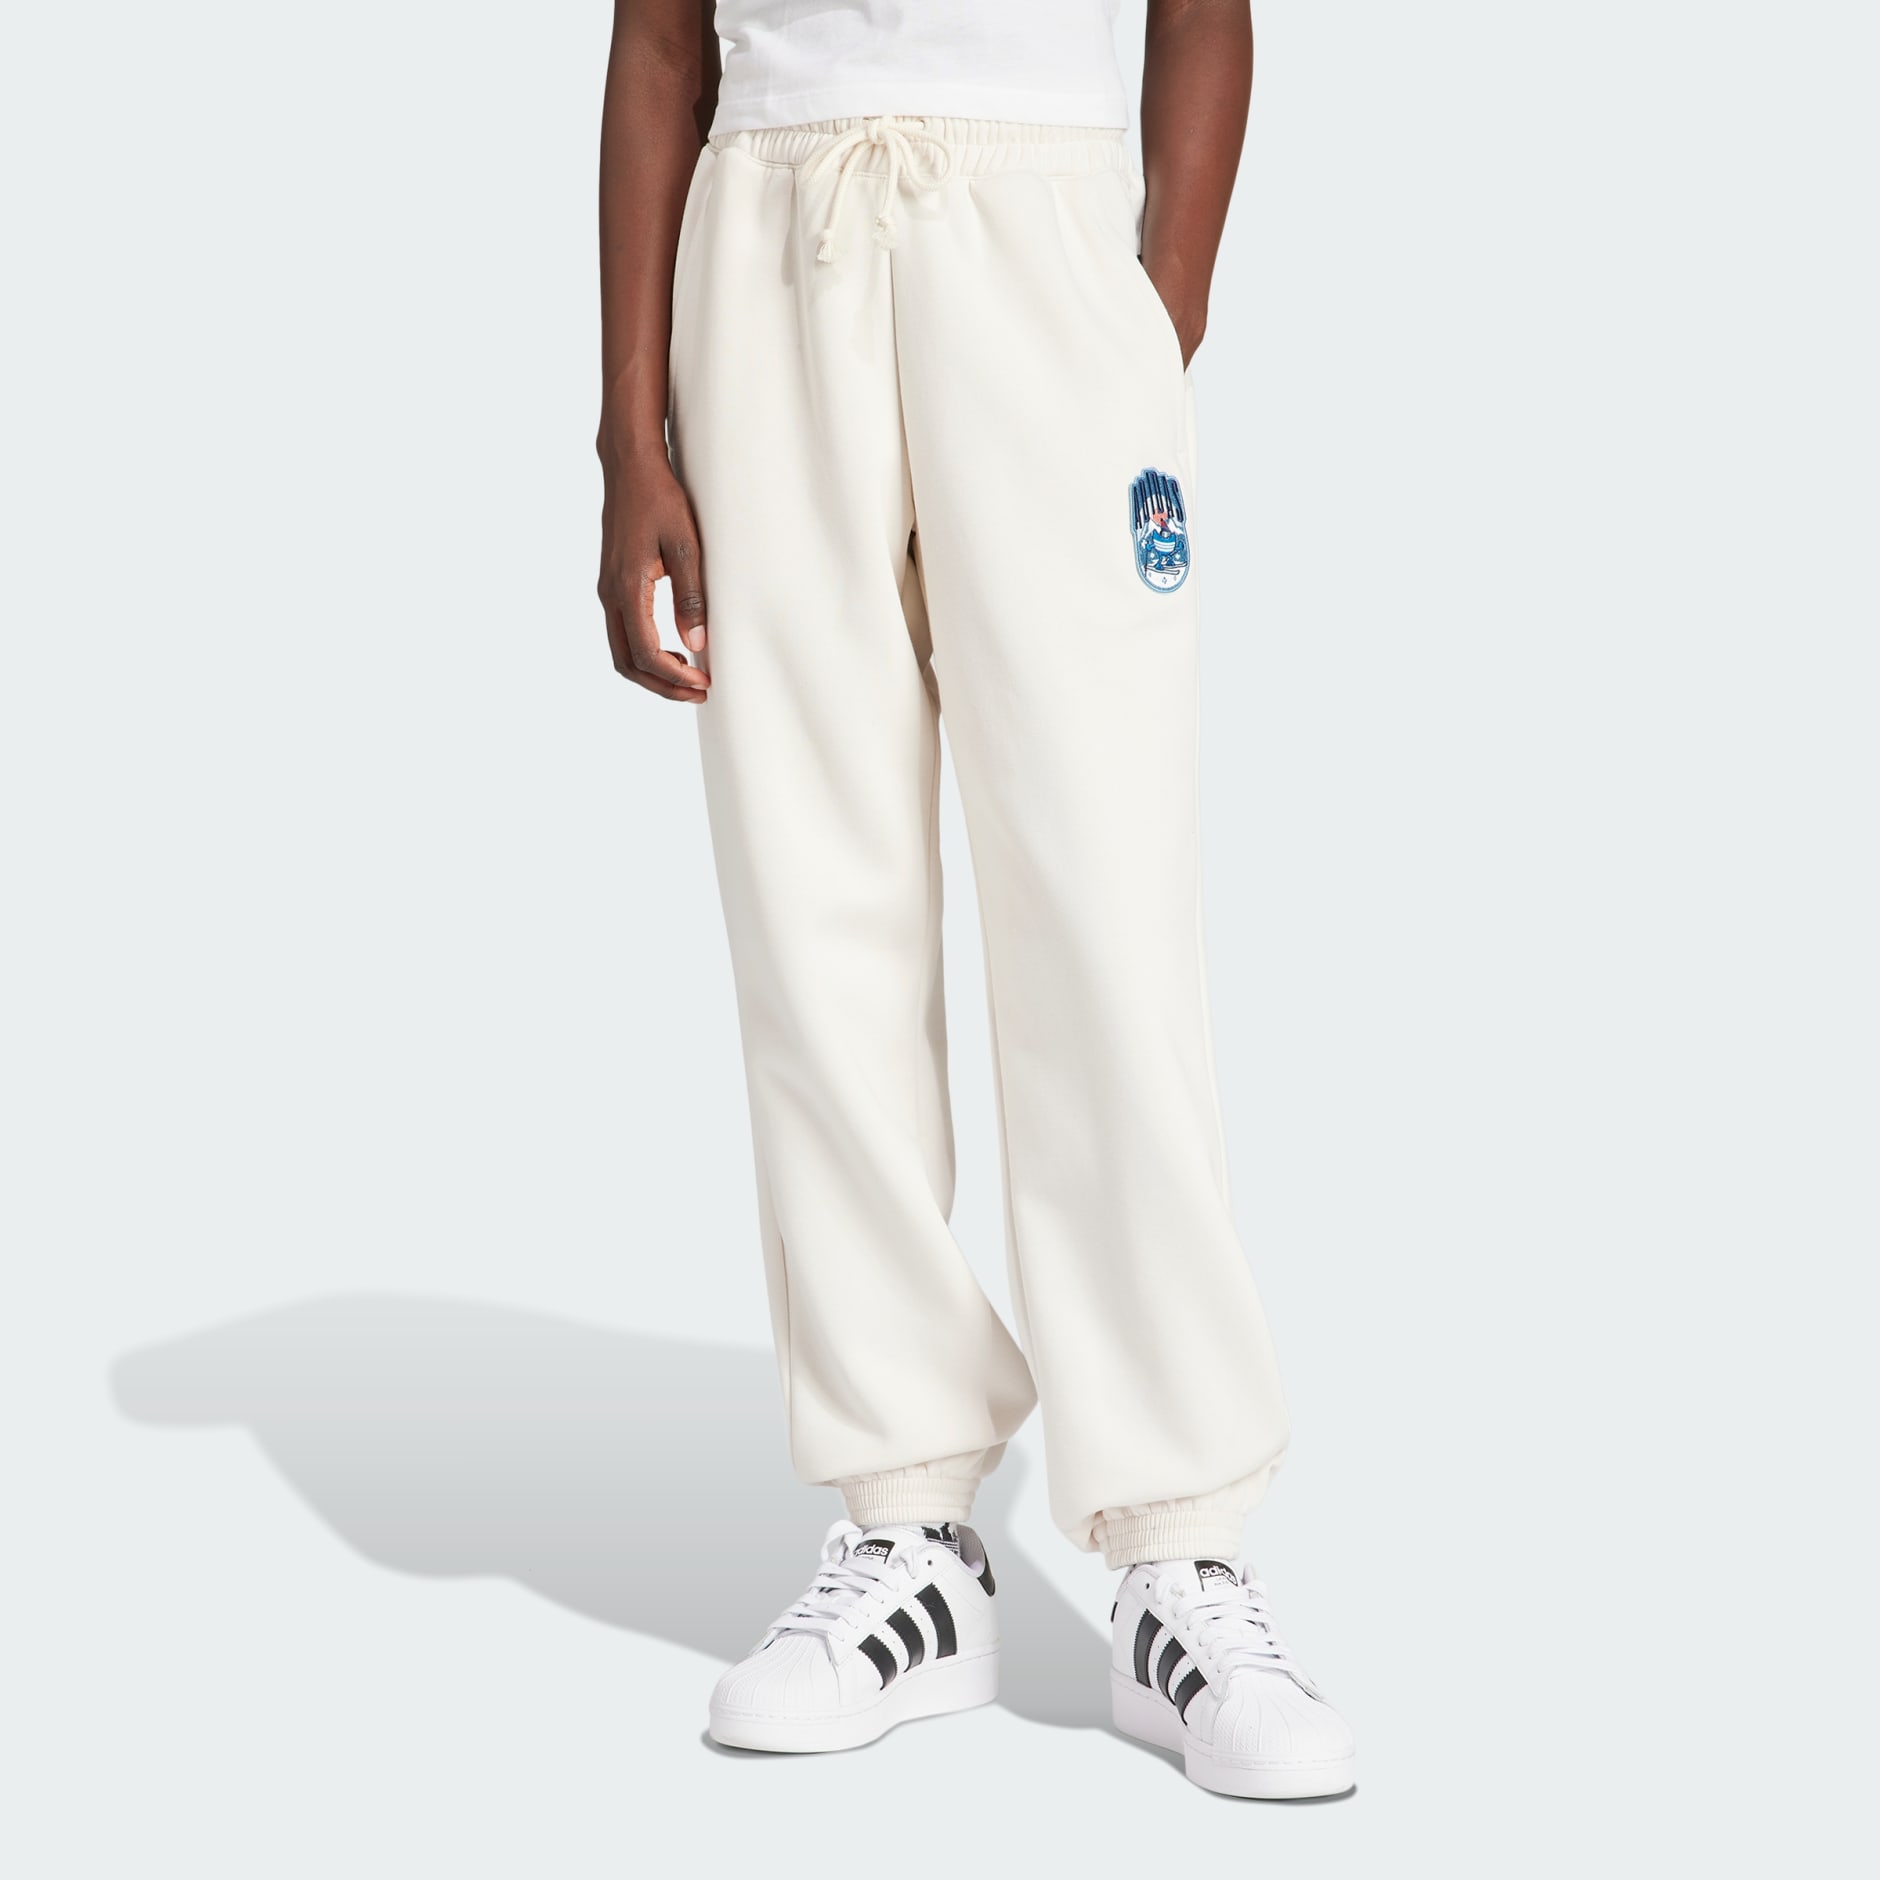 Women's Clothing - Holiday Sweat Pants (Gender Neutral) - White